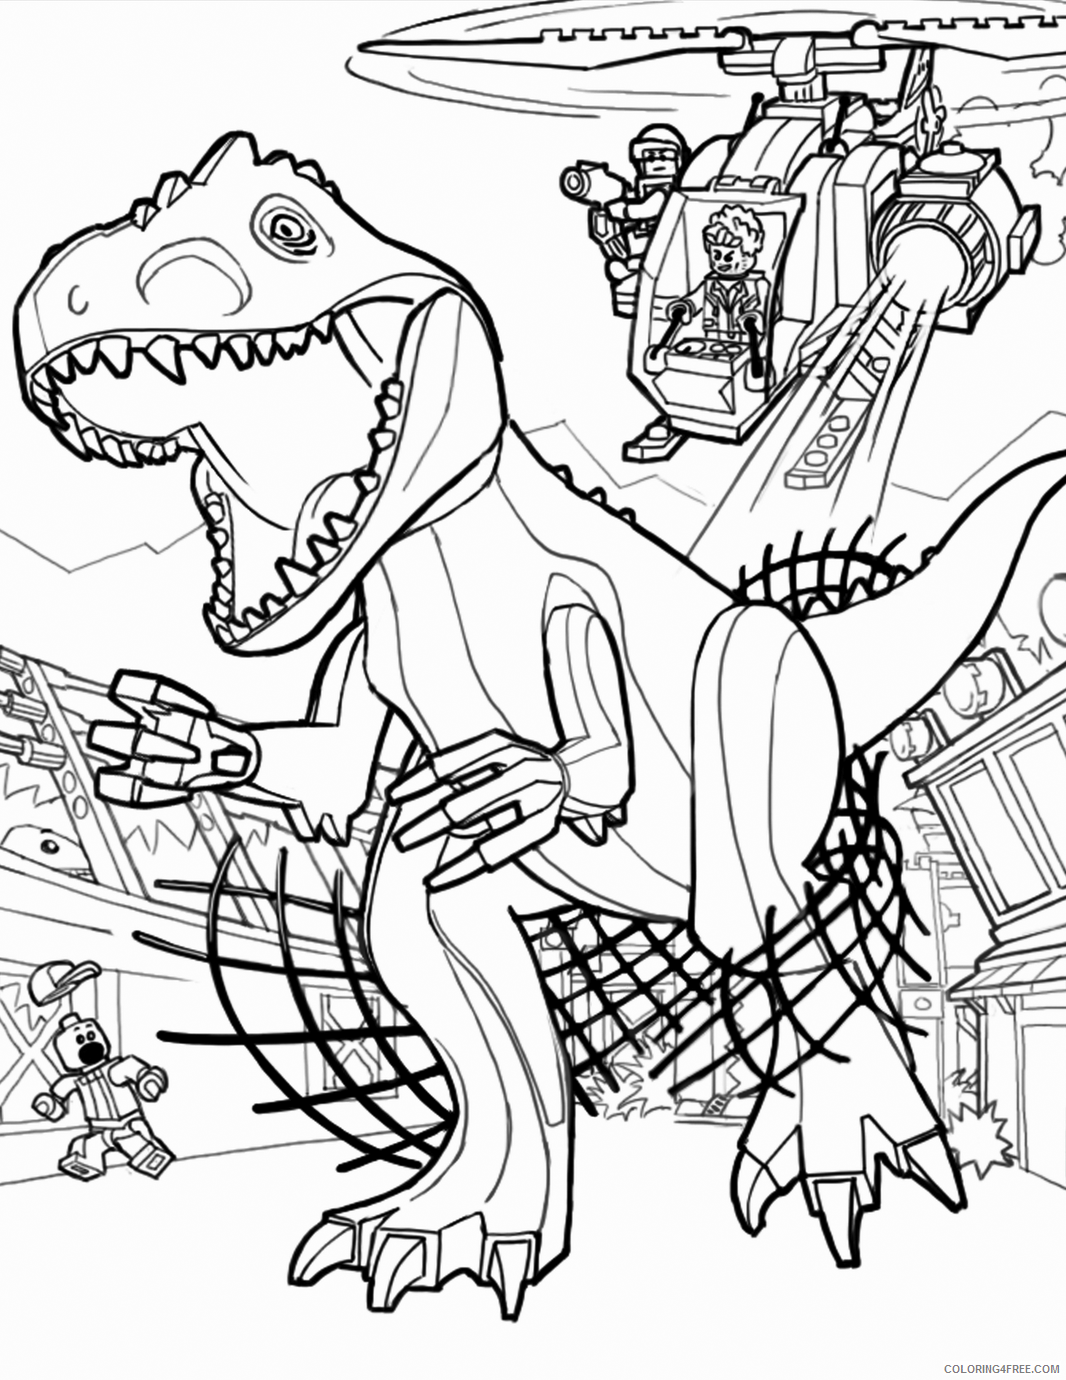 Jurassic World Coloring Pages for boys Air Capture Printable 2020 0507 Coloring4free